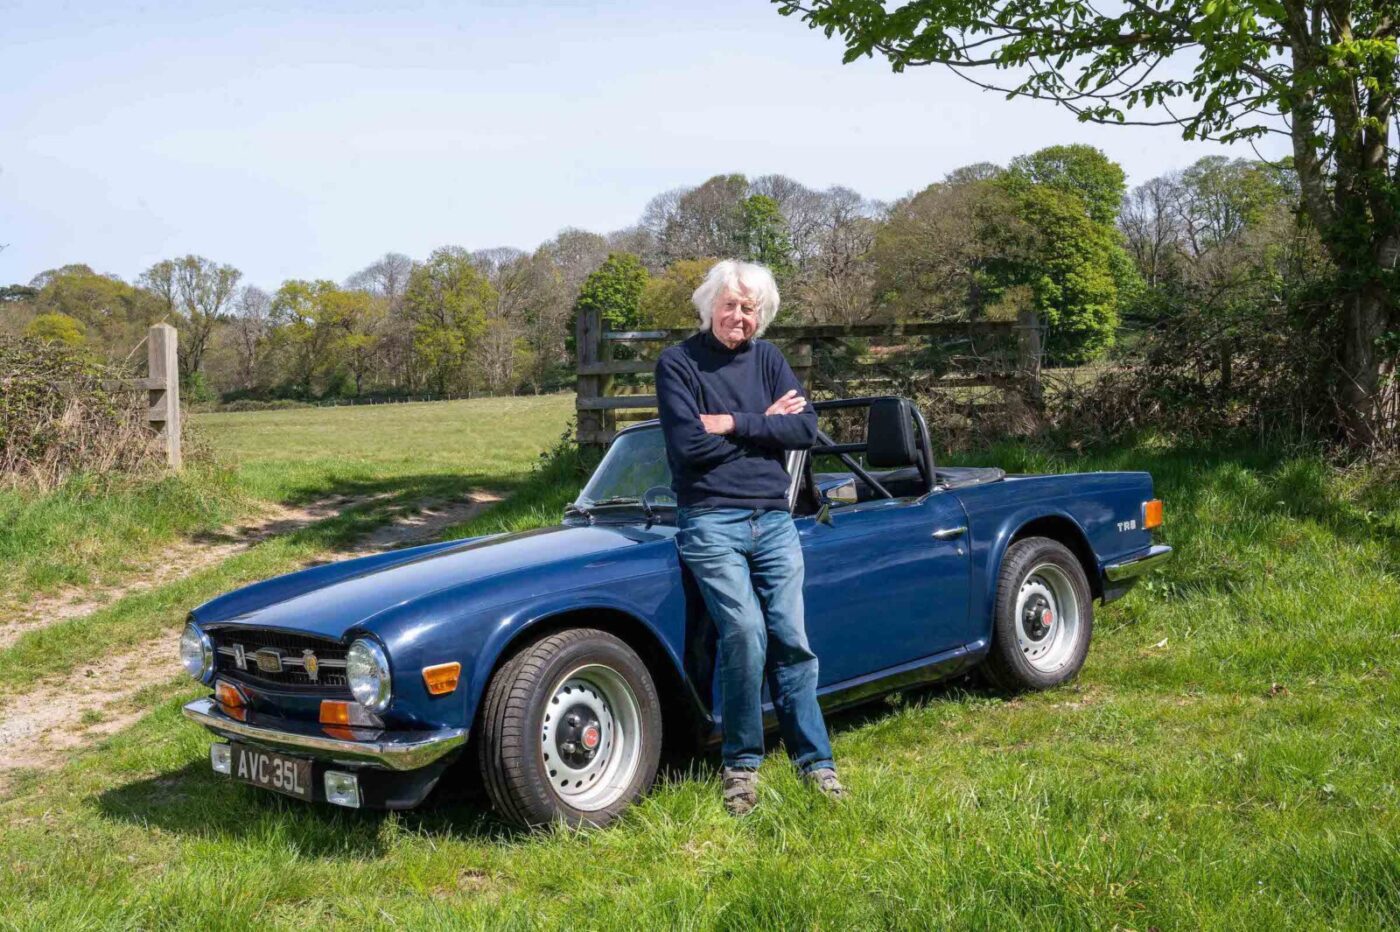 Reg Childerhouse with his Triumph TR6. Photo credit ©Simon Finlay Photography.